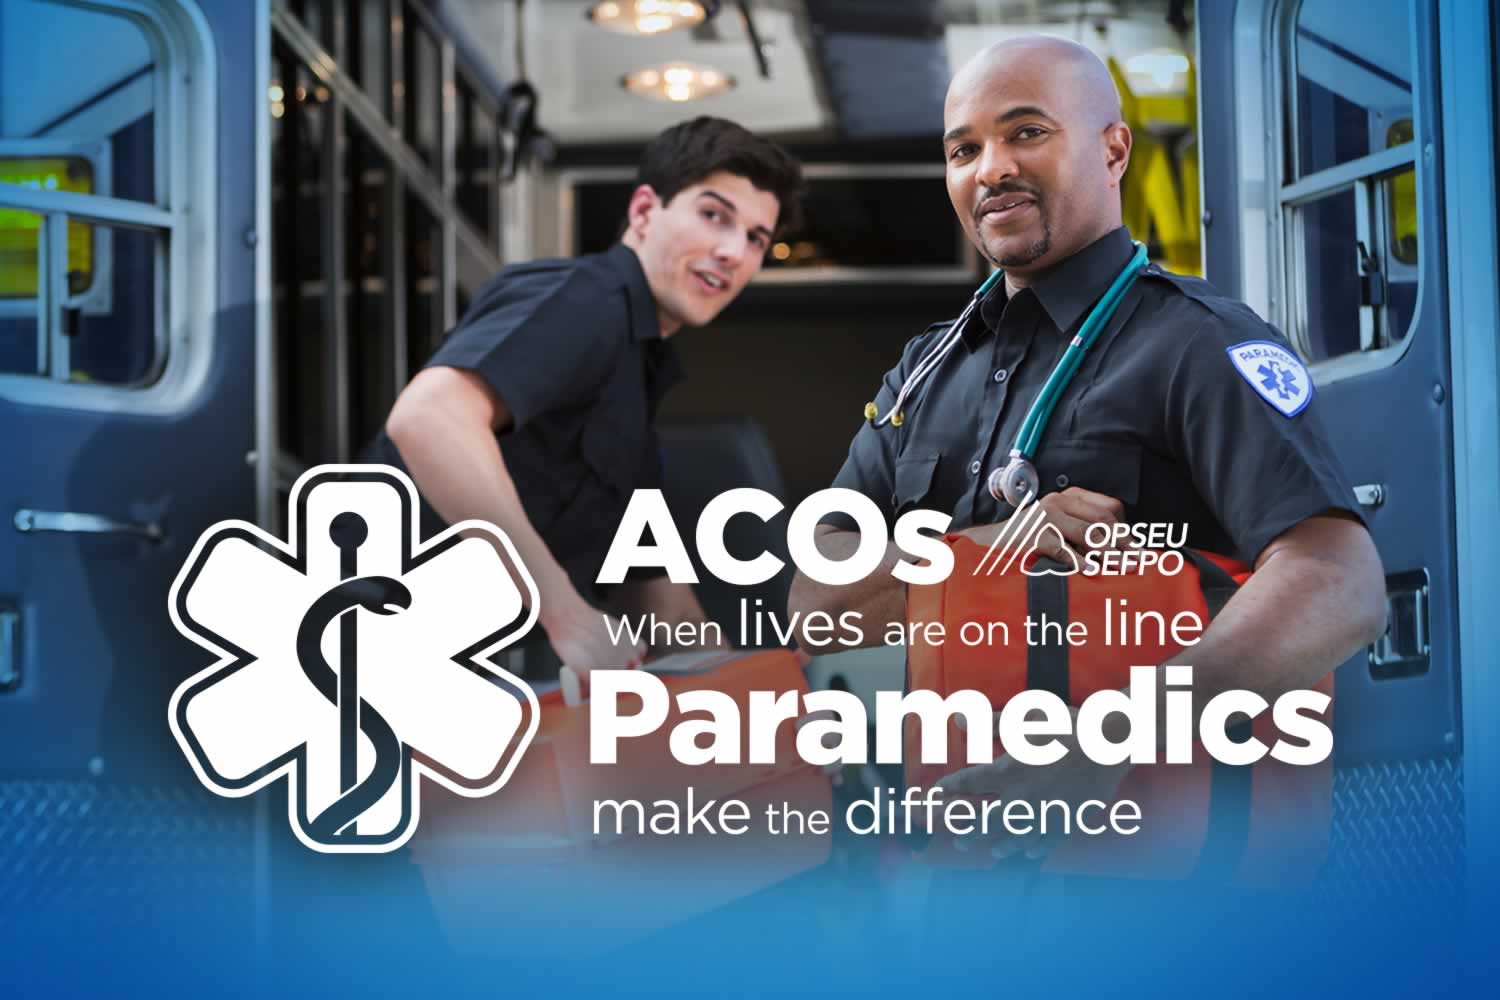 OPSEU ACOS - When lives are on the line Paramedics make the difference